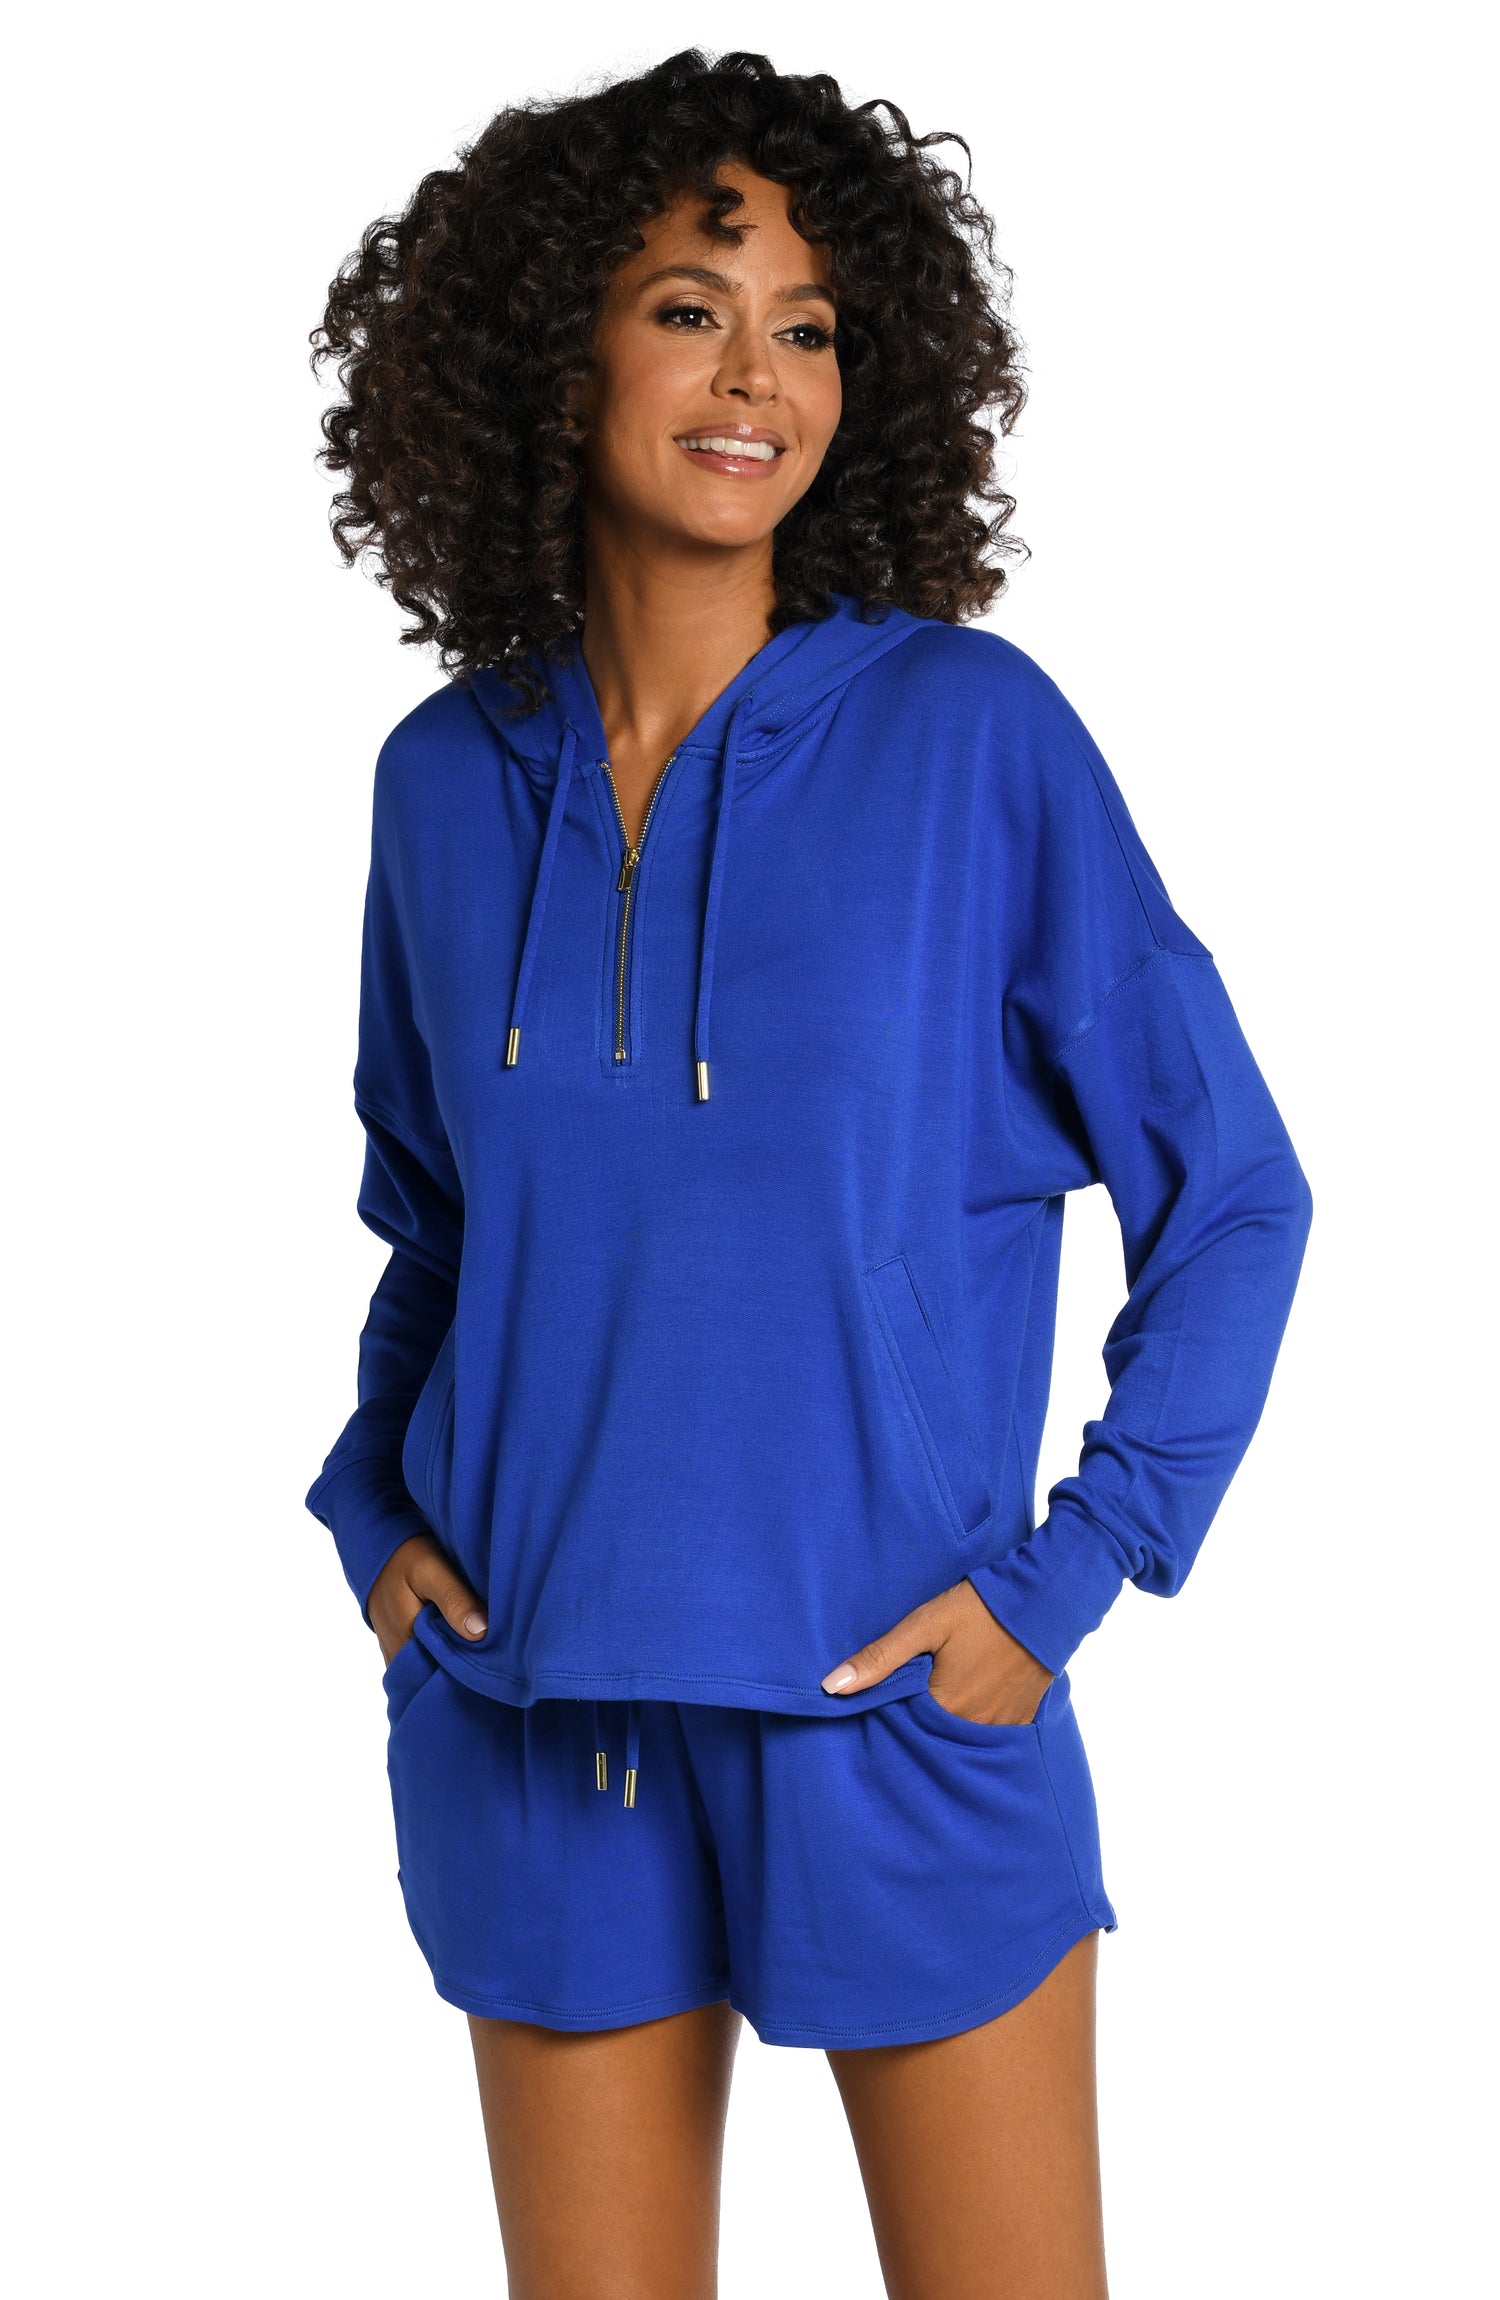 Model is wearing a sapphire colored hooded sweater from our Living in Leisure collection!